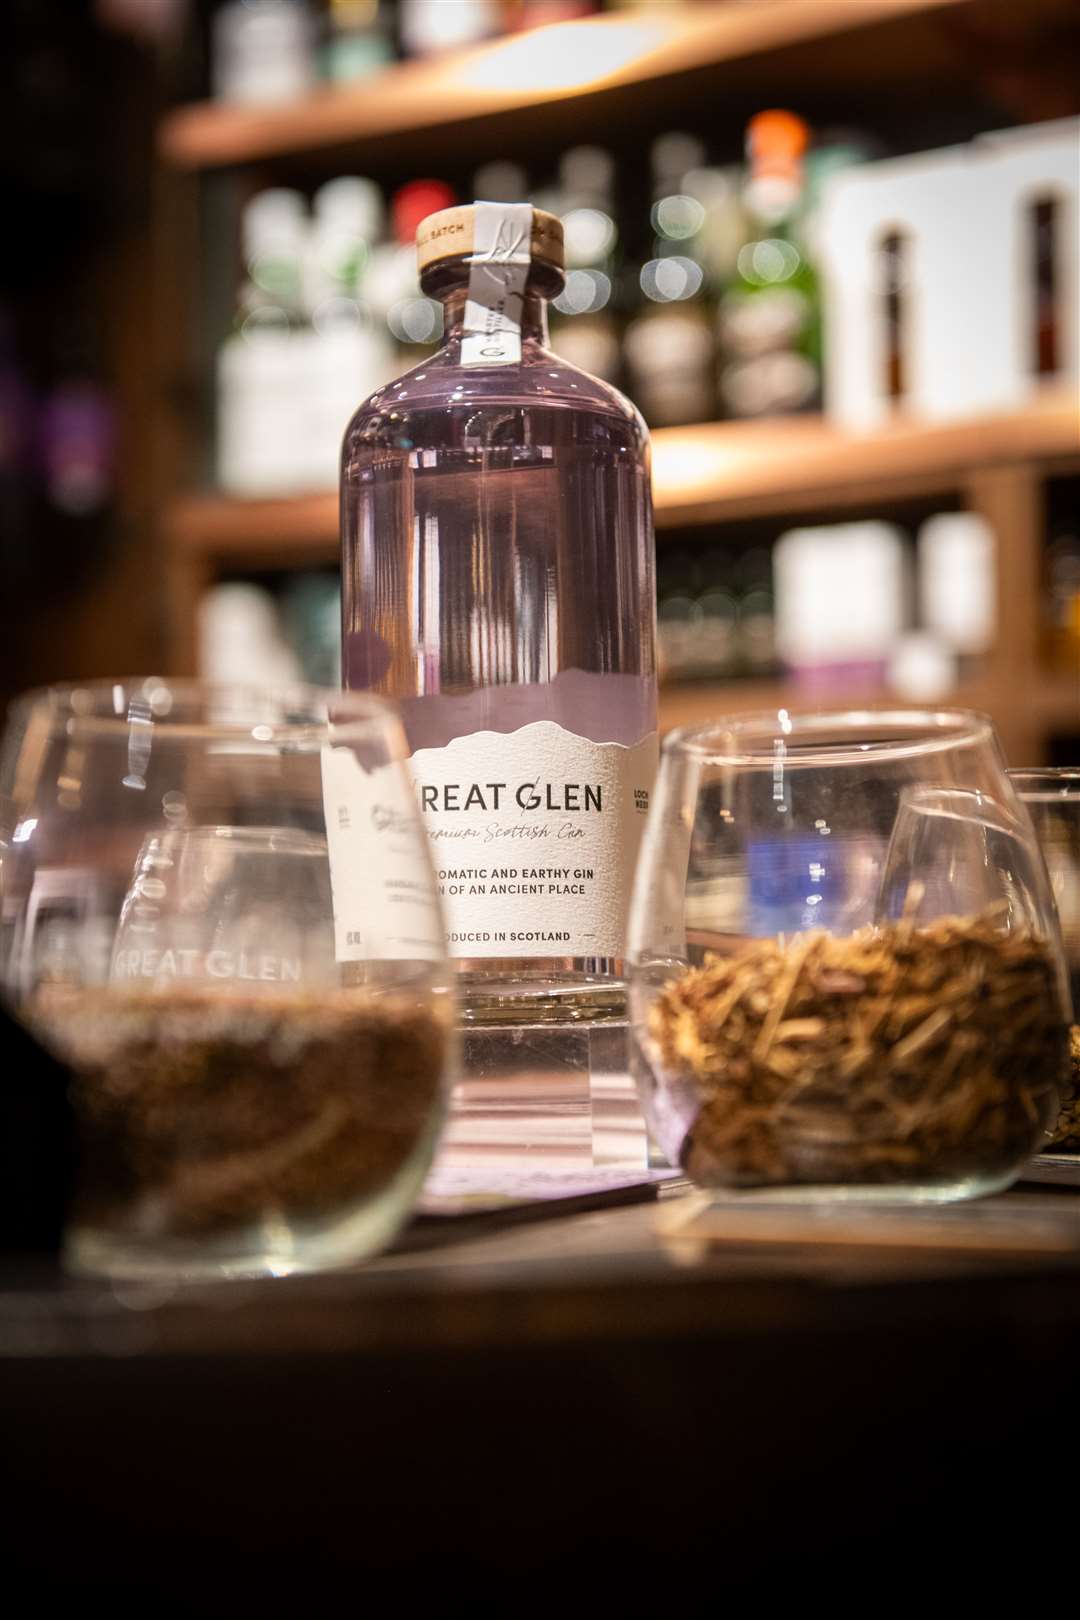 Great Glen Gin is one of Cobbs' products. Picture: Callum Mackay